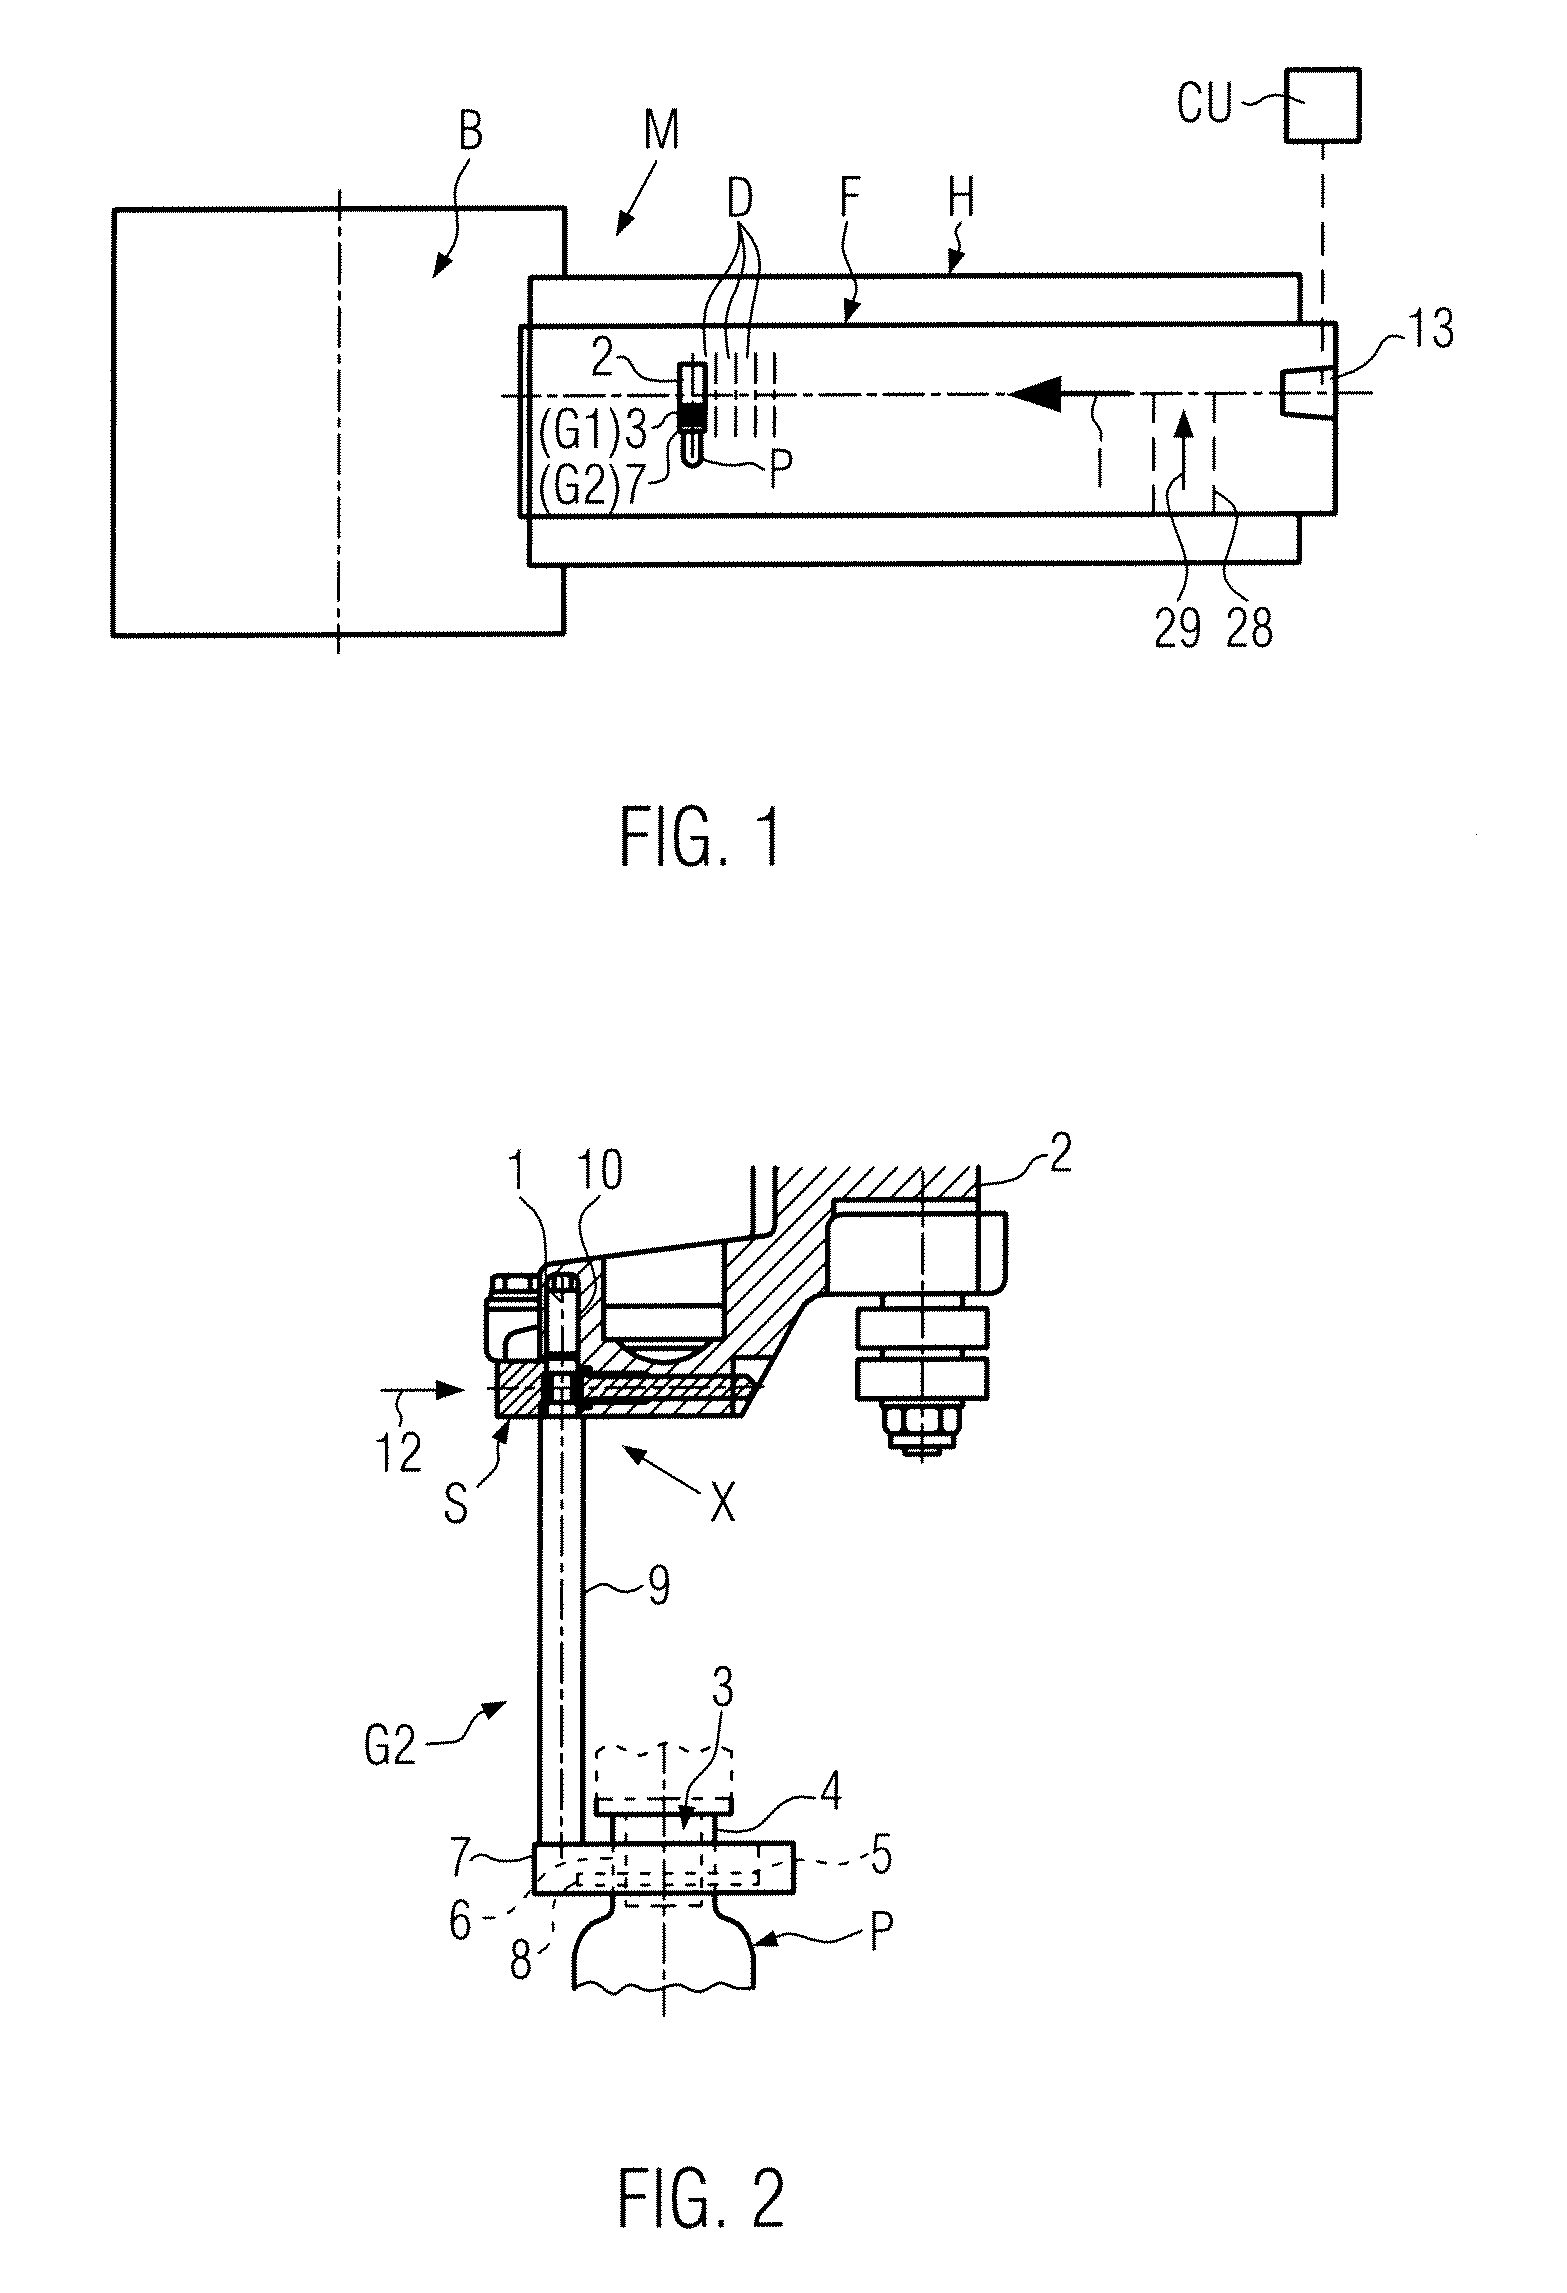 Quick-change system and operating method for a container processing machine